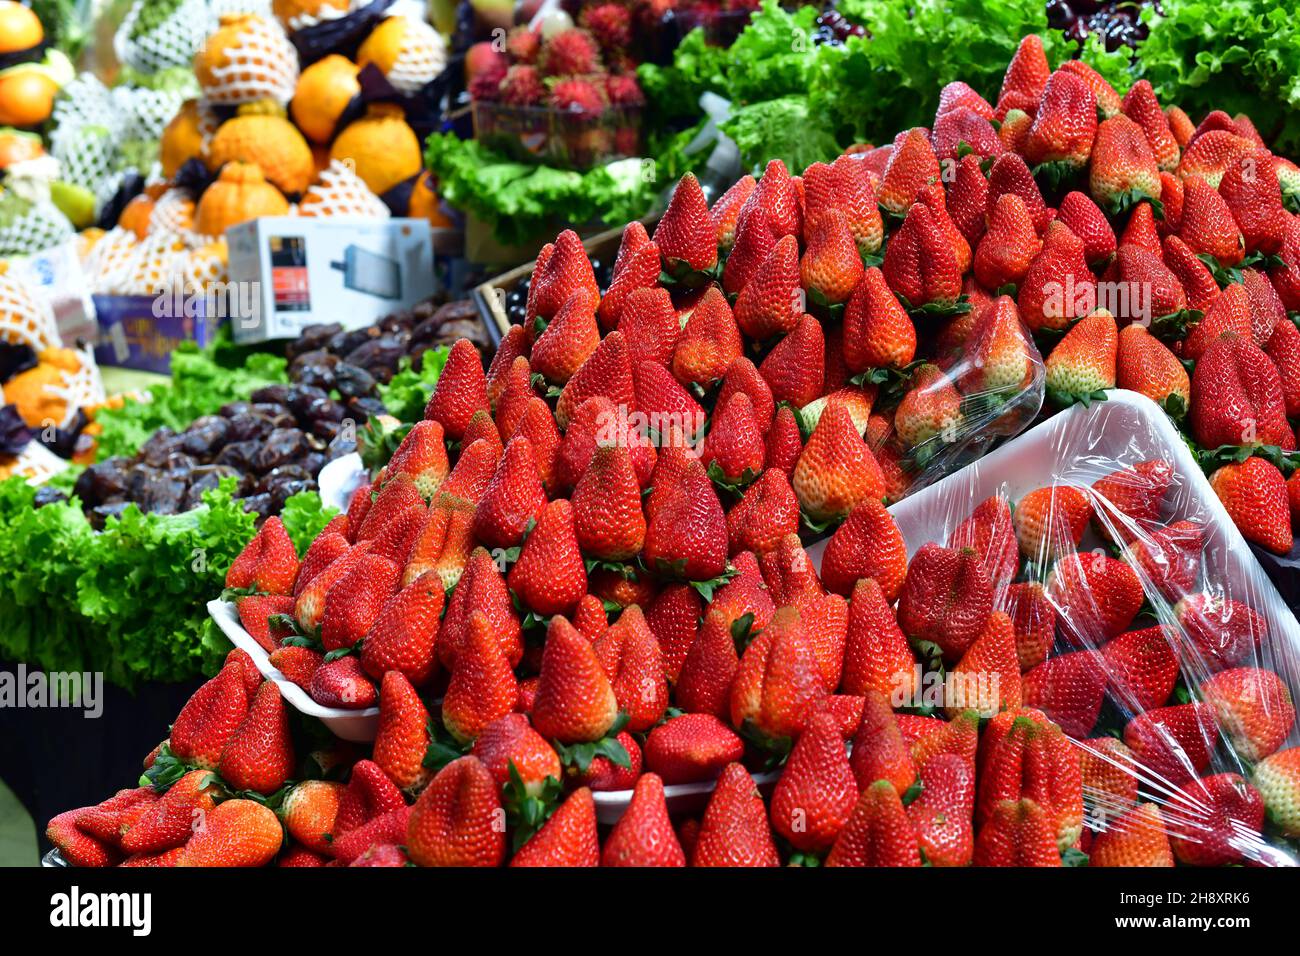 Fresh strawberries and other fruits at a market stall in the Municipal Market. Sao Paulo, Brazil Stock Photo